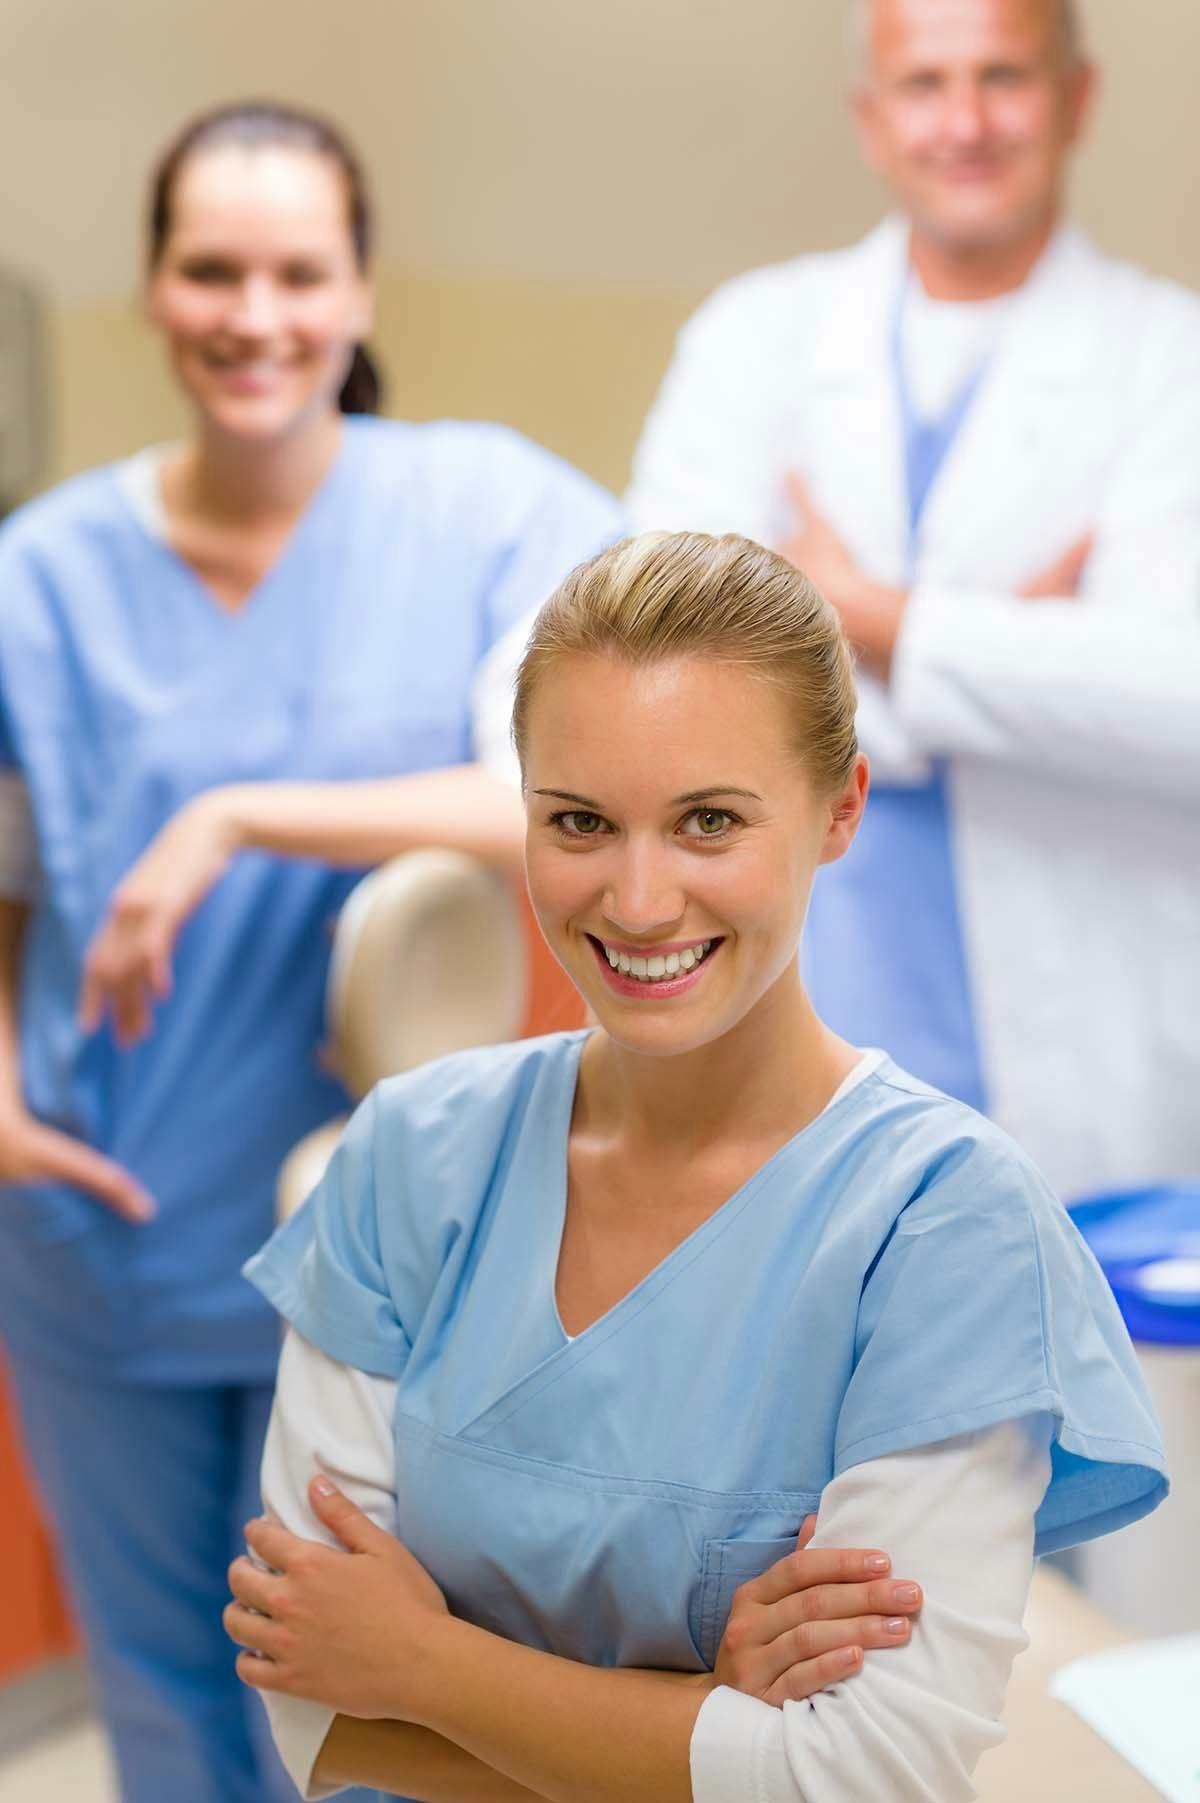 How to Leverage Temporary Staff in the Dental Practice Effortlessly | © CANDYBOX IMAGES - STOCK.ADOBE.COM